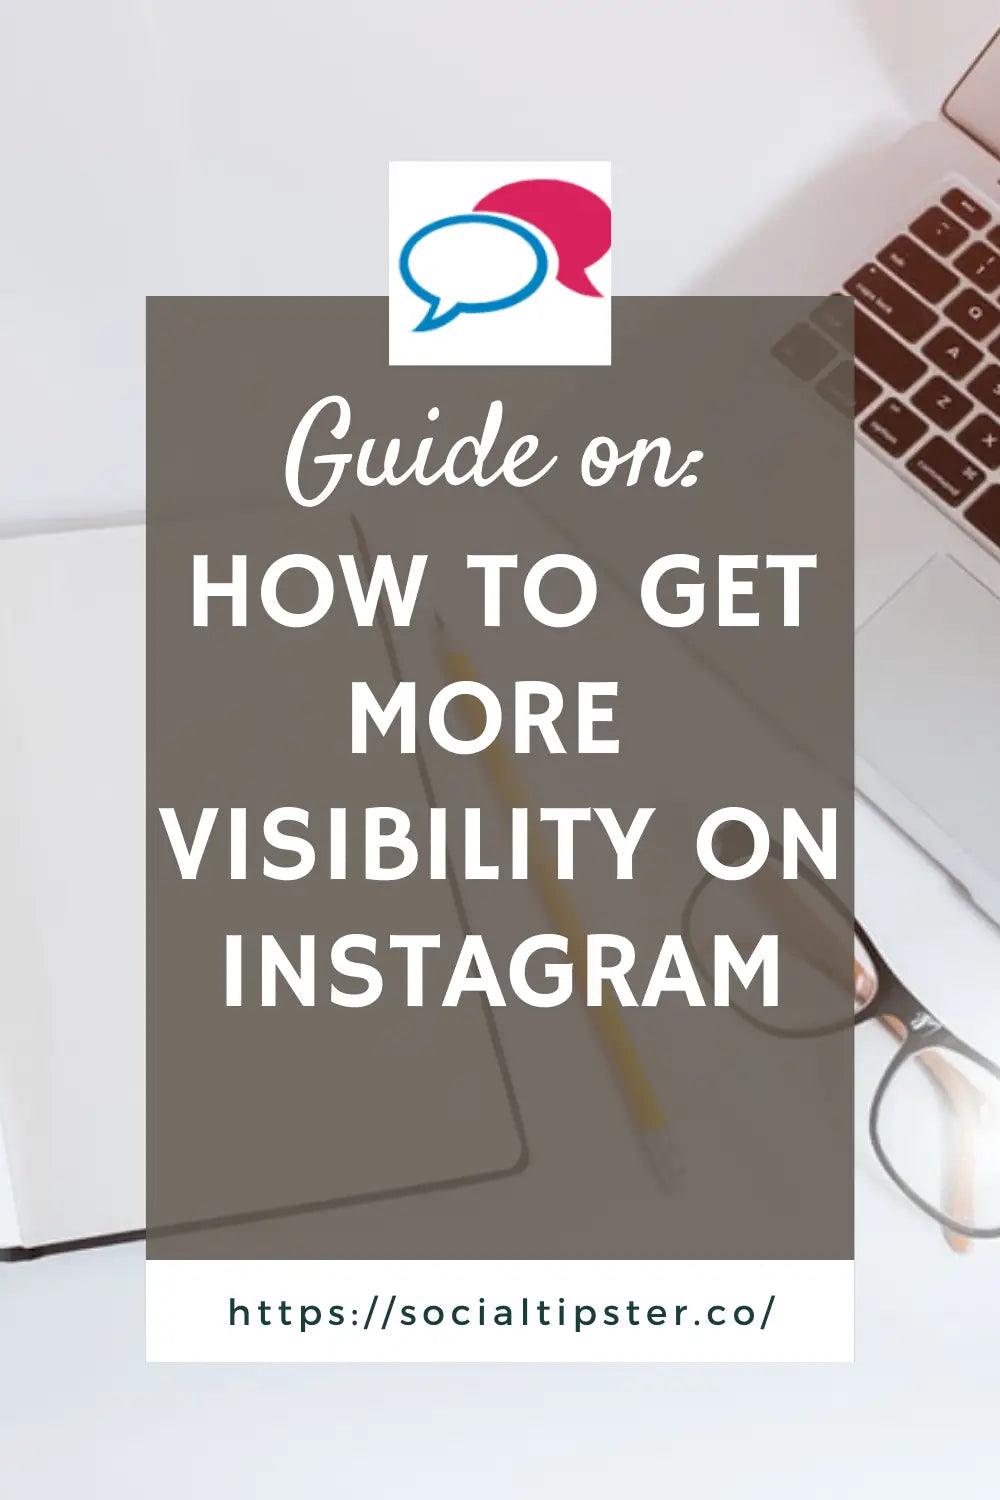 How to get more visibility on Instagram;to get more visibility on Instagram